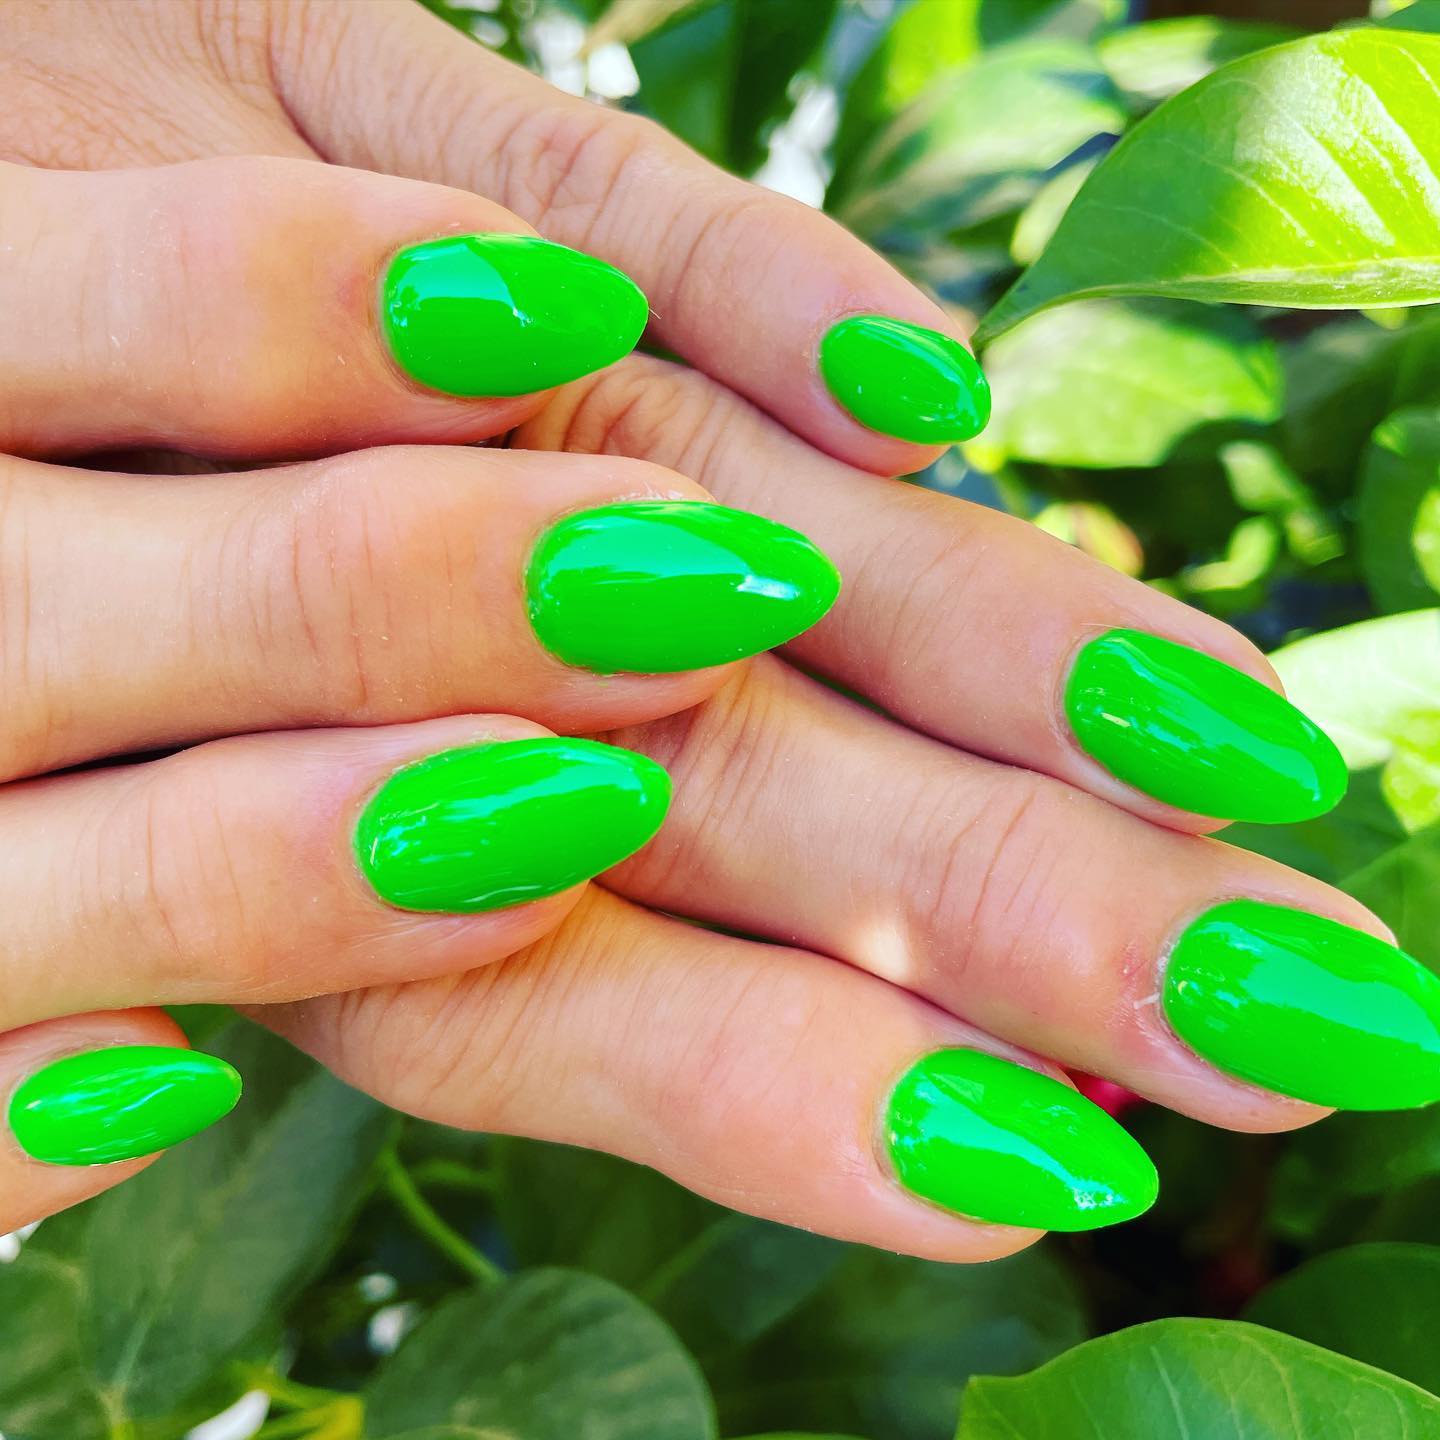 For your almond nails to shine out, have you ever tried this neon tone of green? Look how cool it is.